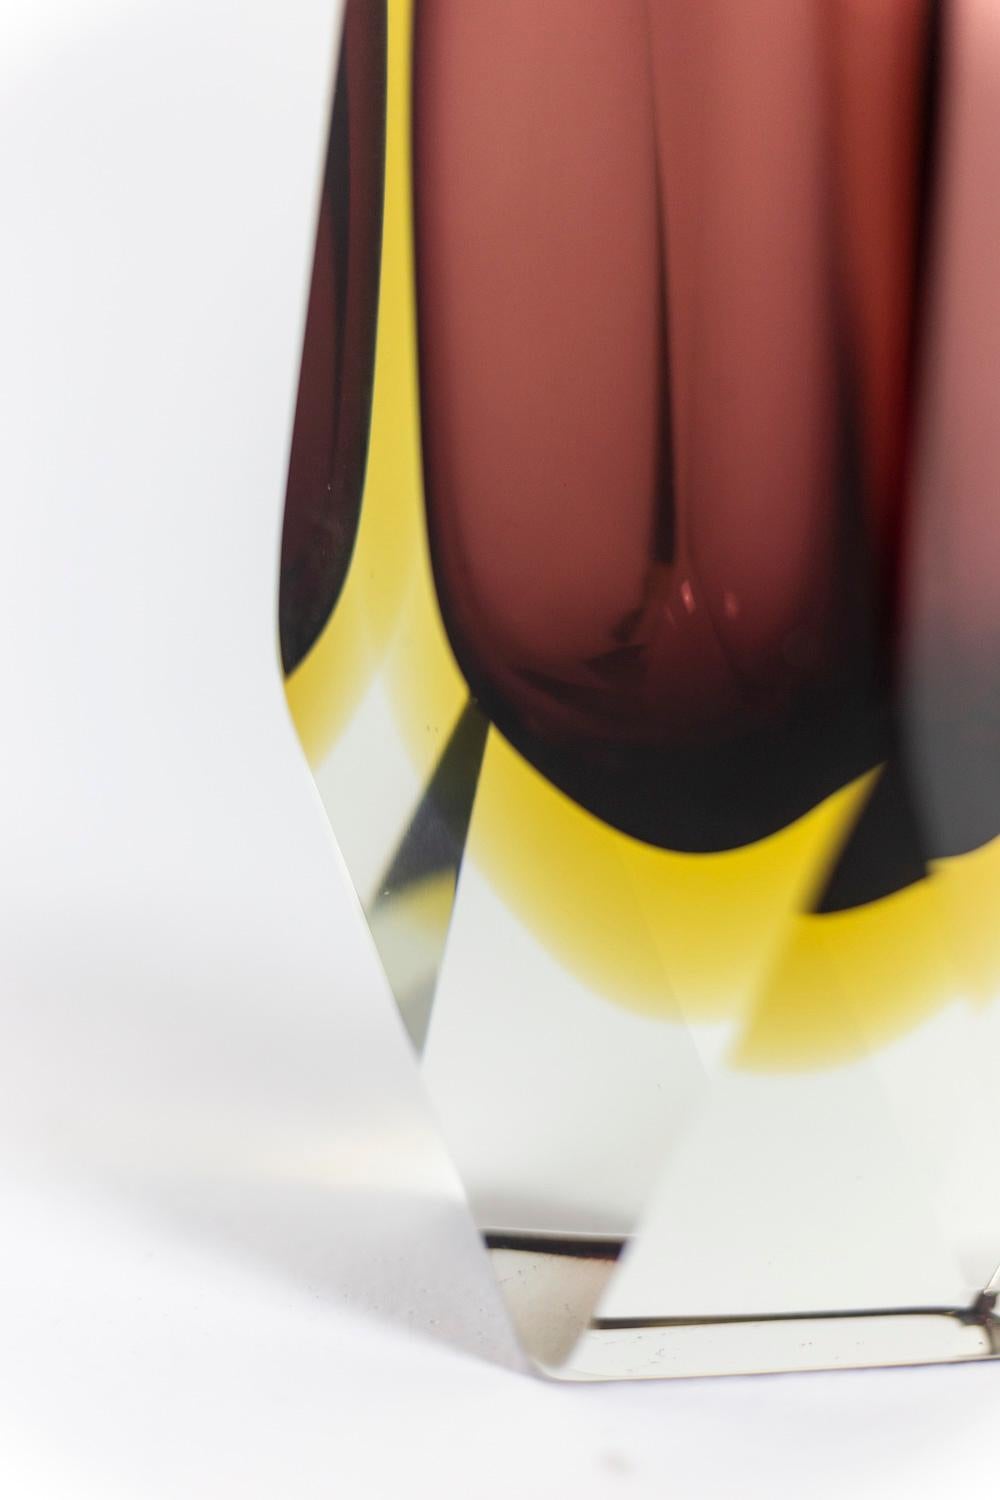 Flavio Poli, attributed to.
Luigi Mandruzzato, edited by. 

Murano vase in submerged glass with geometric facets, burgundy and yellow in color.

Italian work realized in the 1950s. 
 
 